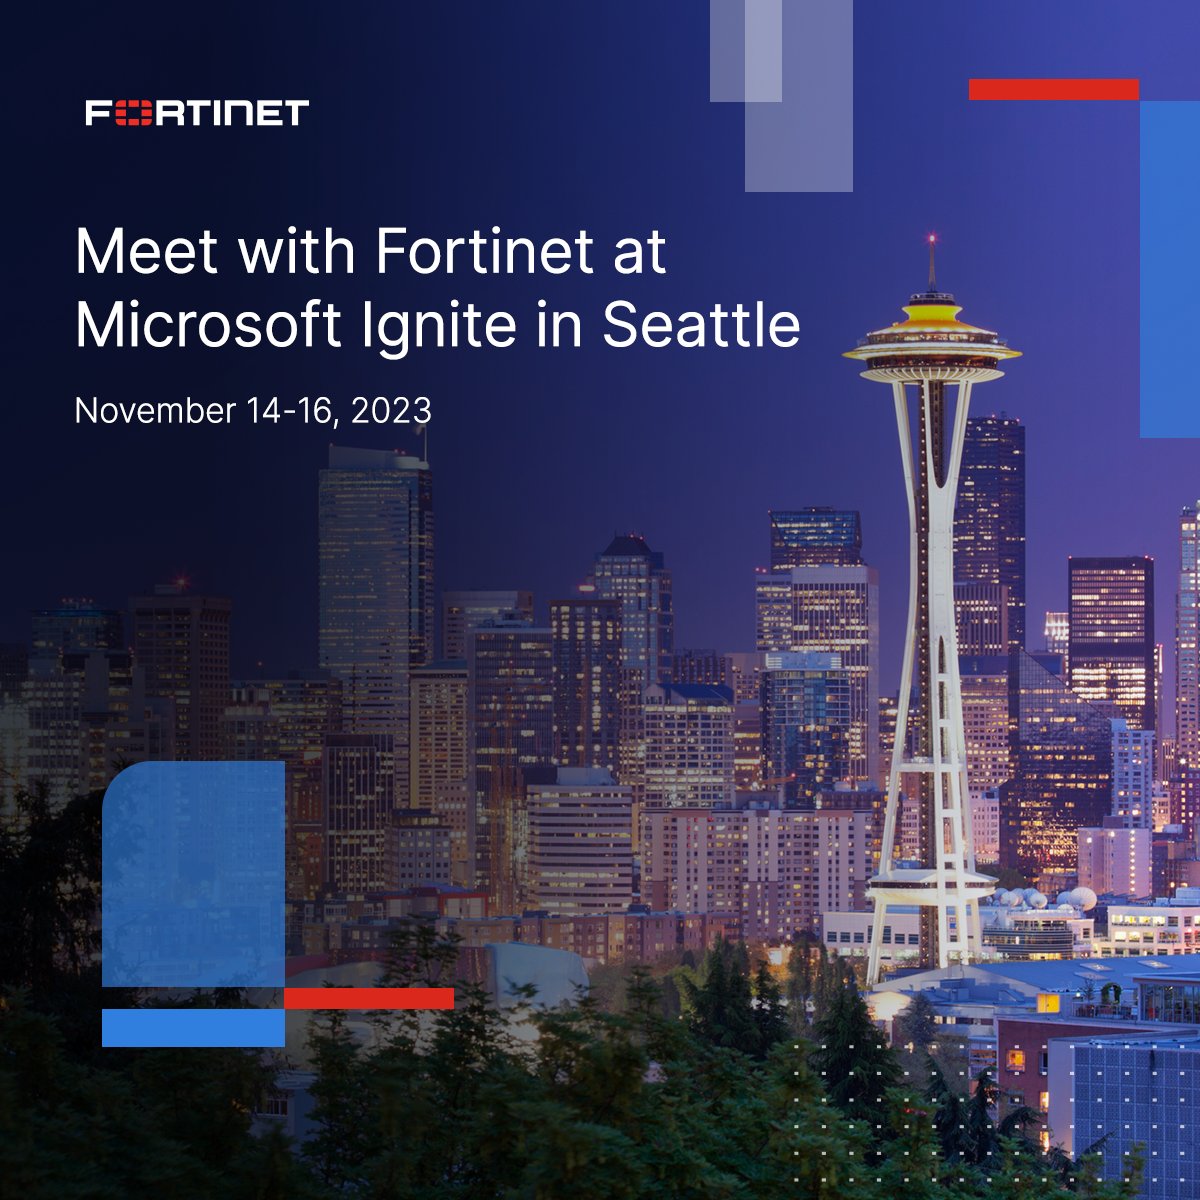 ⏳ It's almost time! #MSIgnite 2023 starts tomorrow. 

Join @Fortinet experts on November 15th and 16th at the Infrastructure Hub in the Summit Building for live demos or connect with us virtually to learn about #Fortinet's #SecurityFabric for #Azure. ftnt.net/6014uxNzk